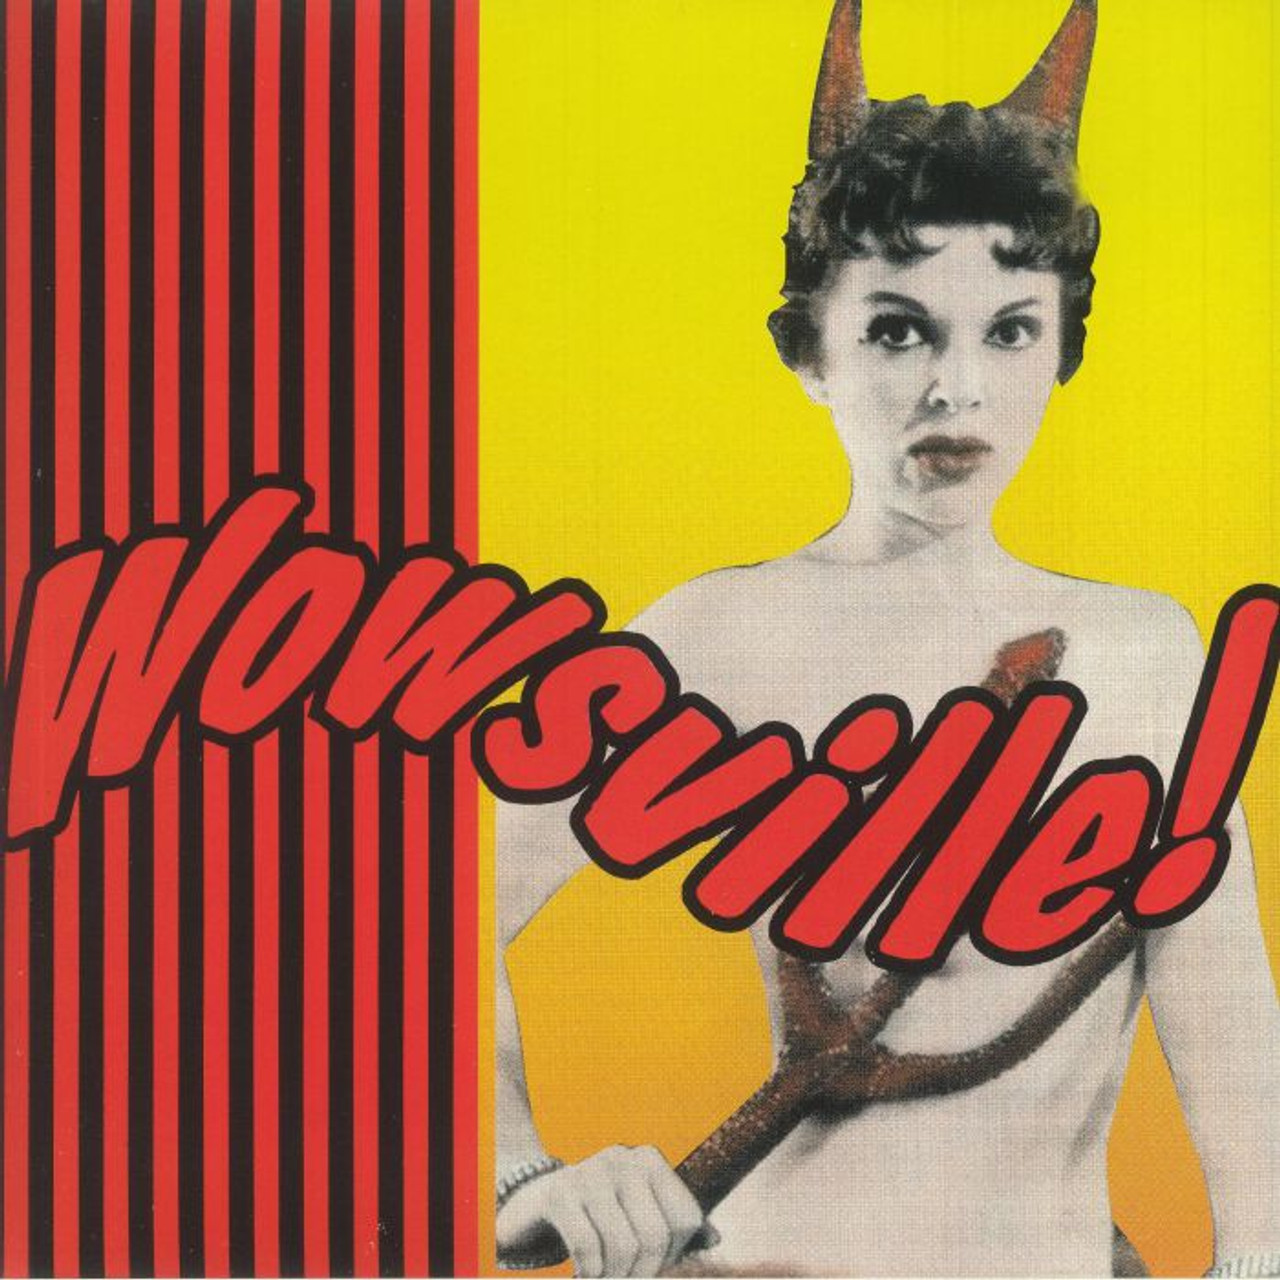 WOWSVILLE! -'60s trash, rockin' and exotica god only knows- COMP LP - Bomp Records